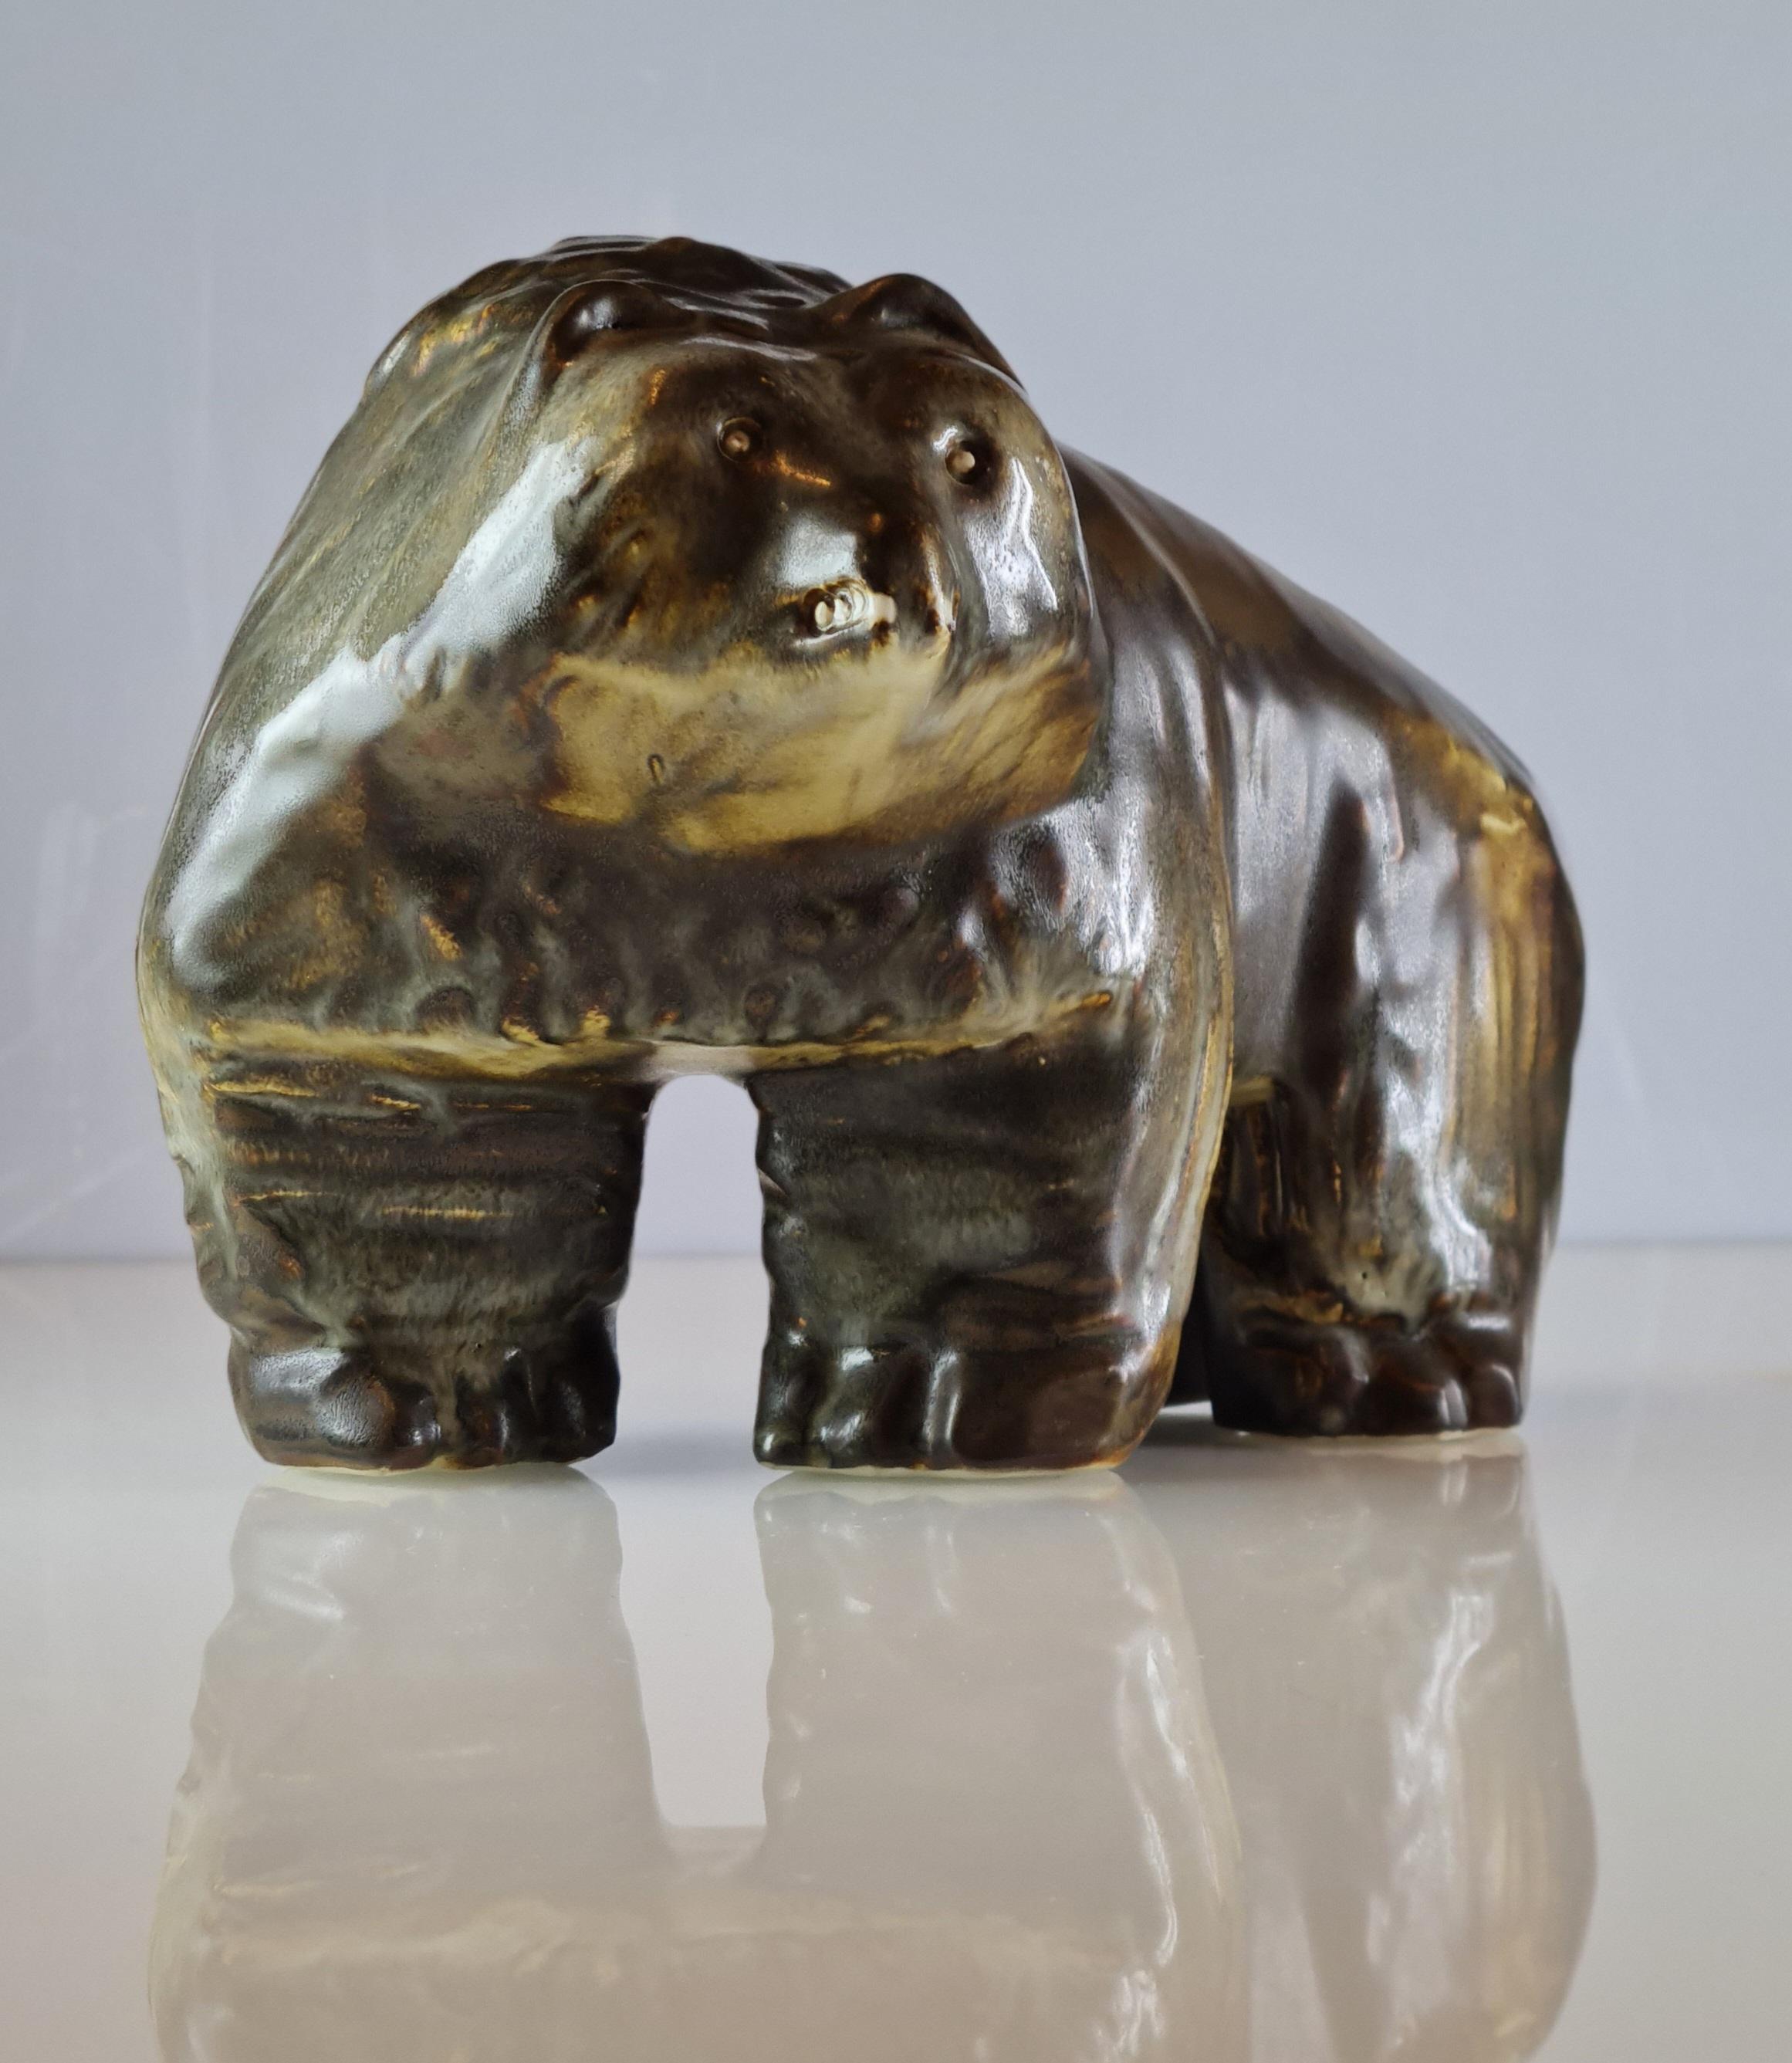 A beautiful and fairly large ceramic bear figurine by the renowned Finnish ceramic artist and designer Taisto Kaasinen for Arabia. The figurine is signed TK and Arabia and is in beautiful condition.

Not only a collector's item for ceramic or